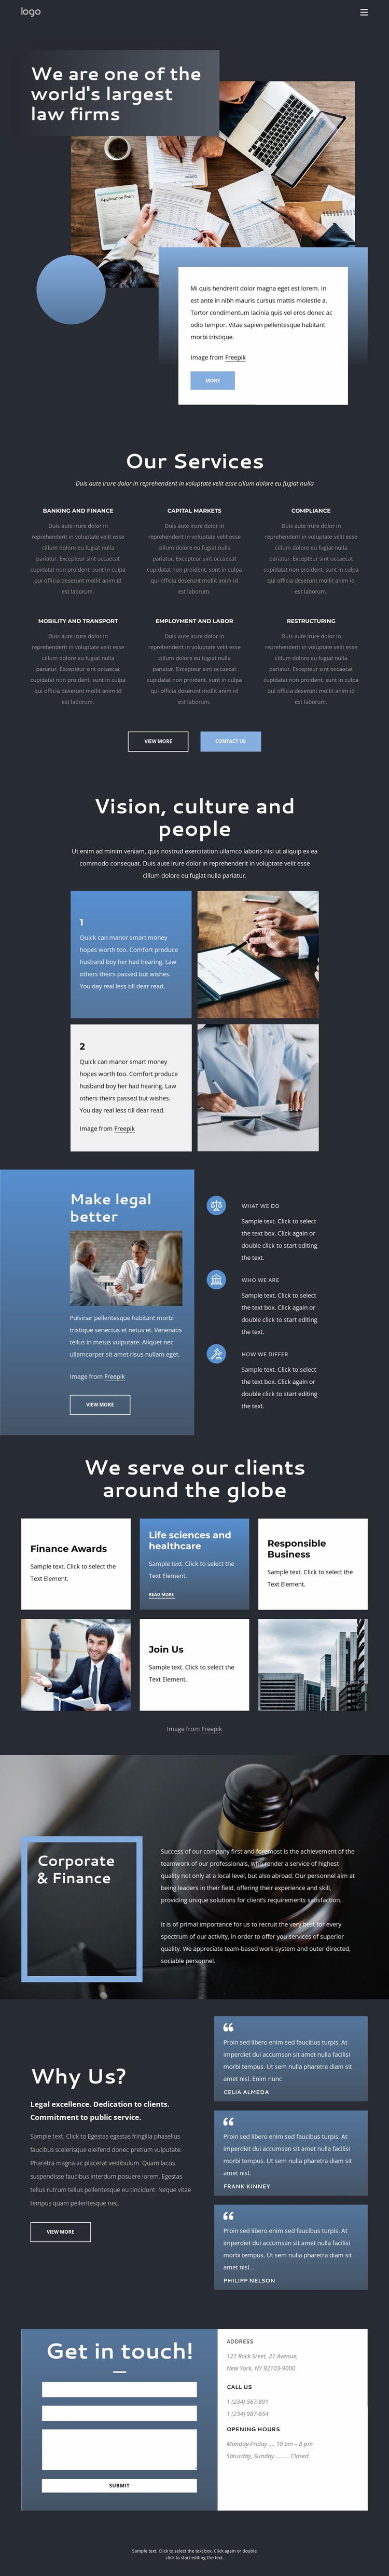 We are an elite law firm eCommerce Template